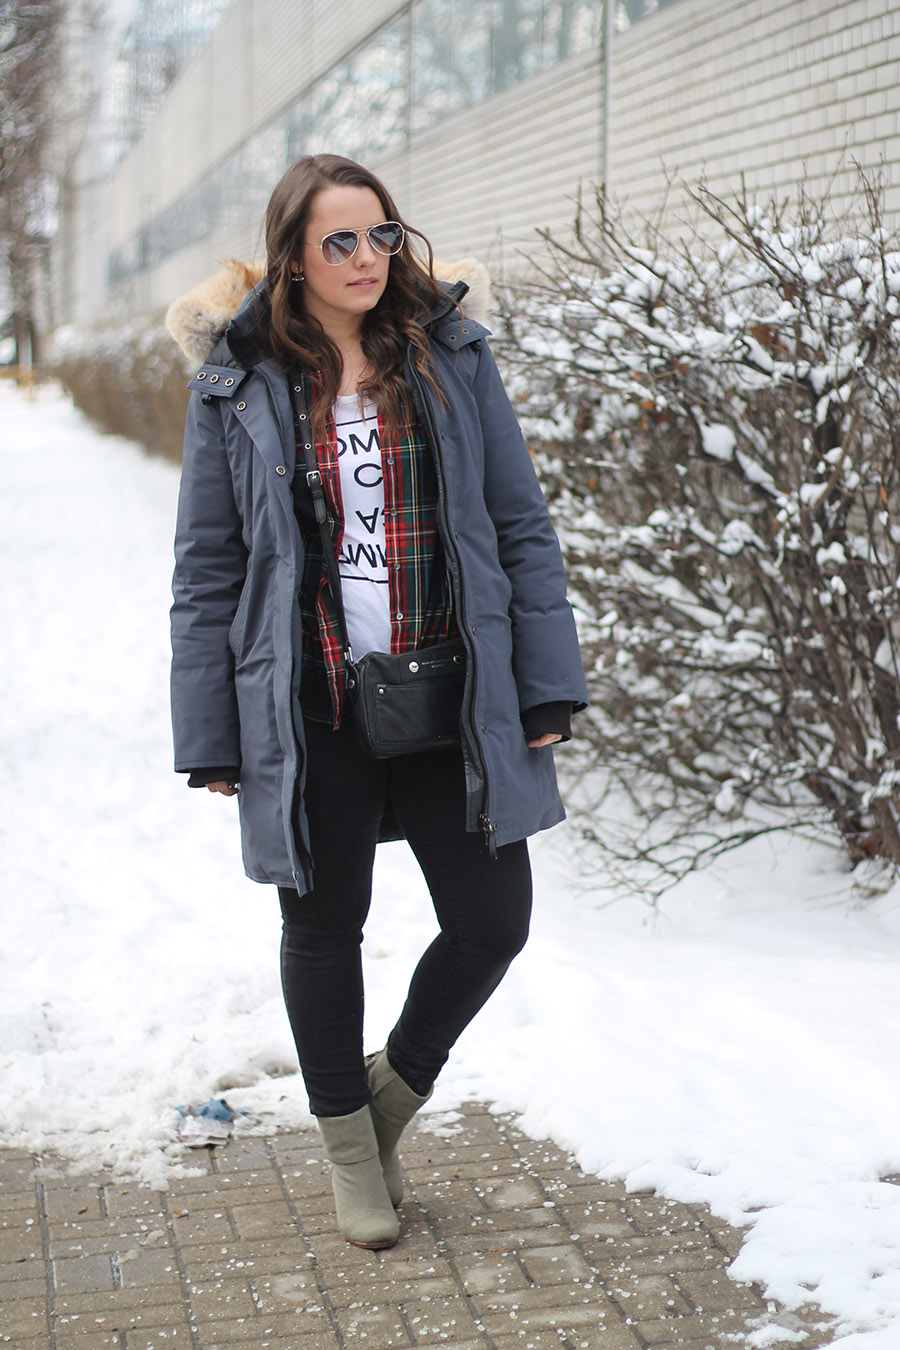 Winter Style, Dressing For Winter, How To Wear Plaid, Best Winter Coat, Winter Fashion Inspiration